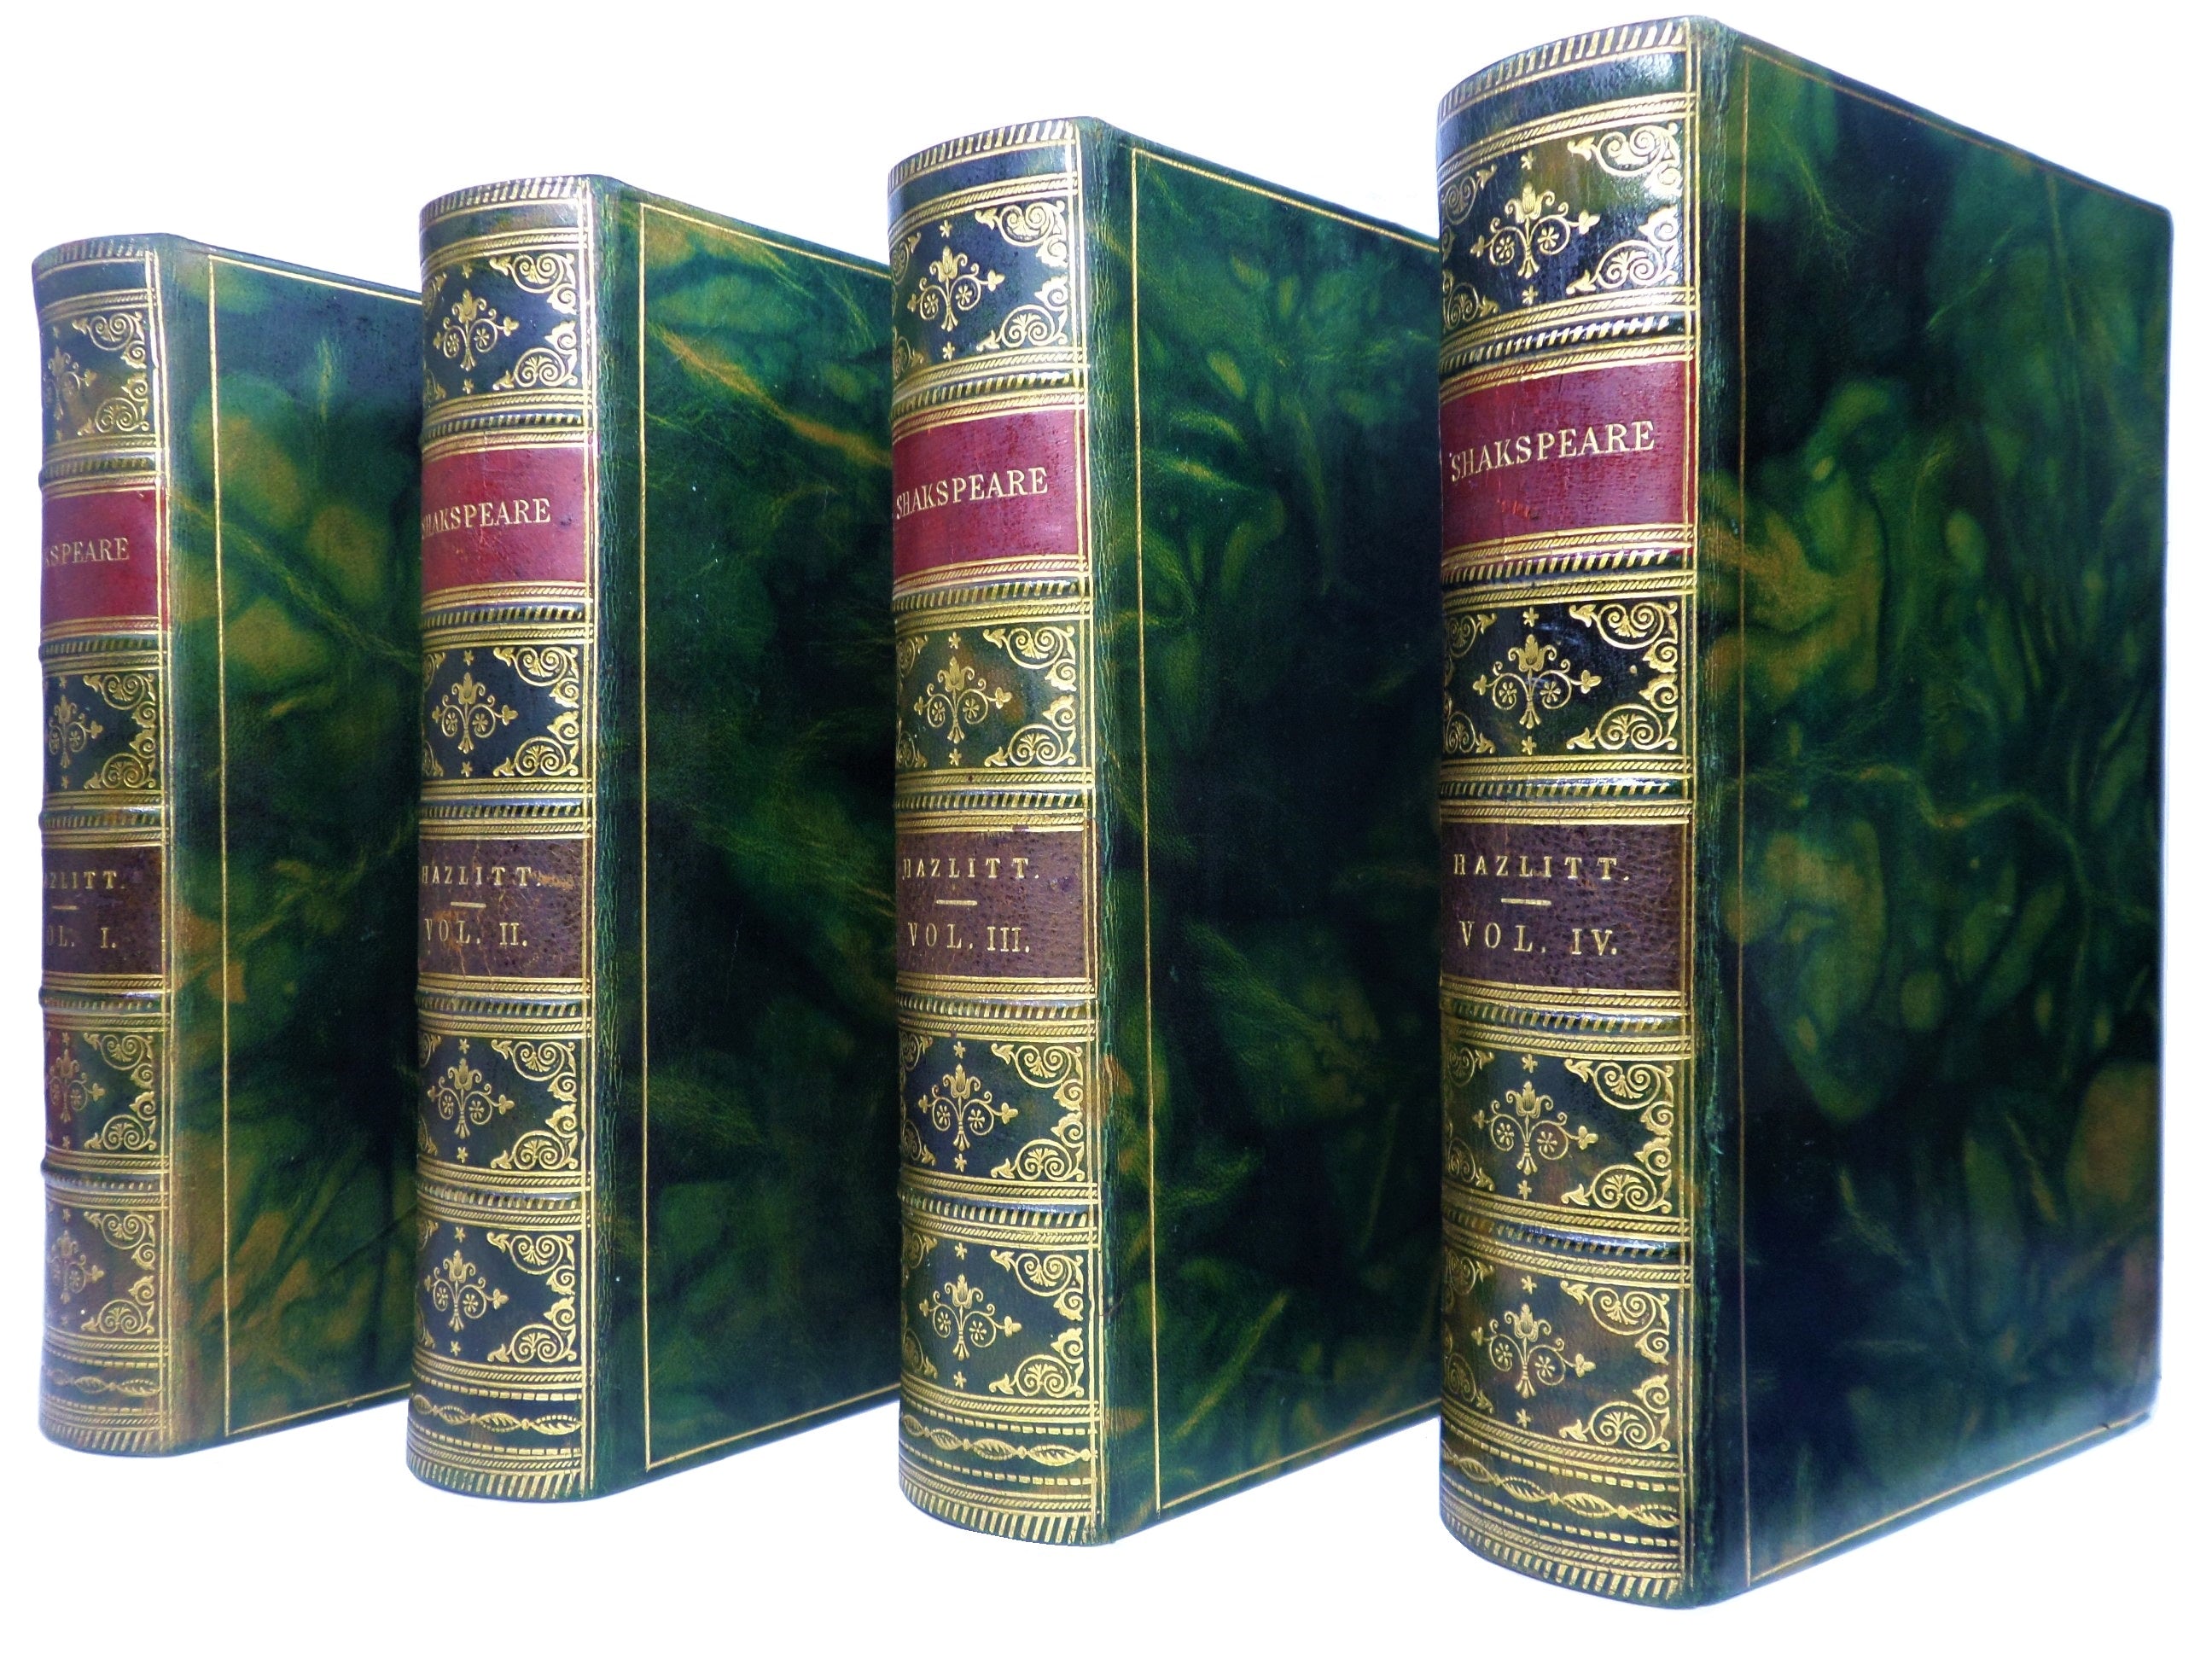 THE DRAMATIC WORKS OF WILLIAM SHAKESPEARE IN FOUR VOLUMES 1857 FINE MARBLED CALF